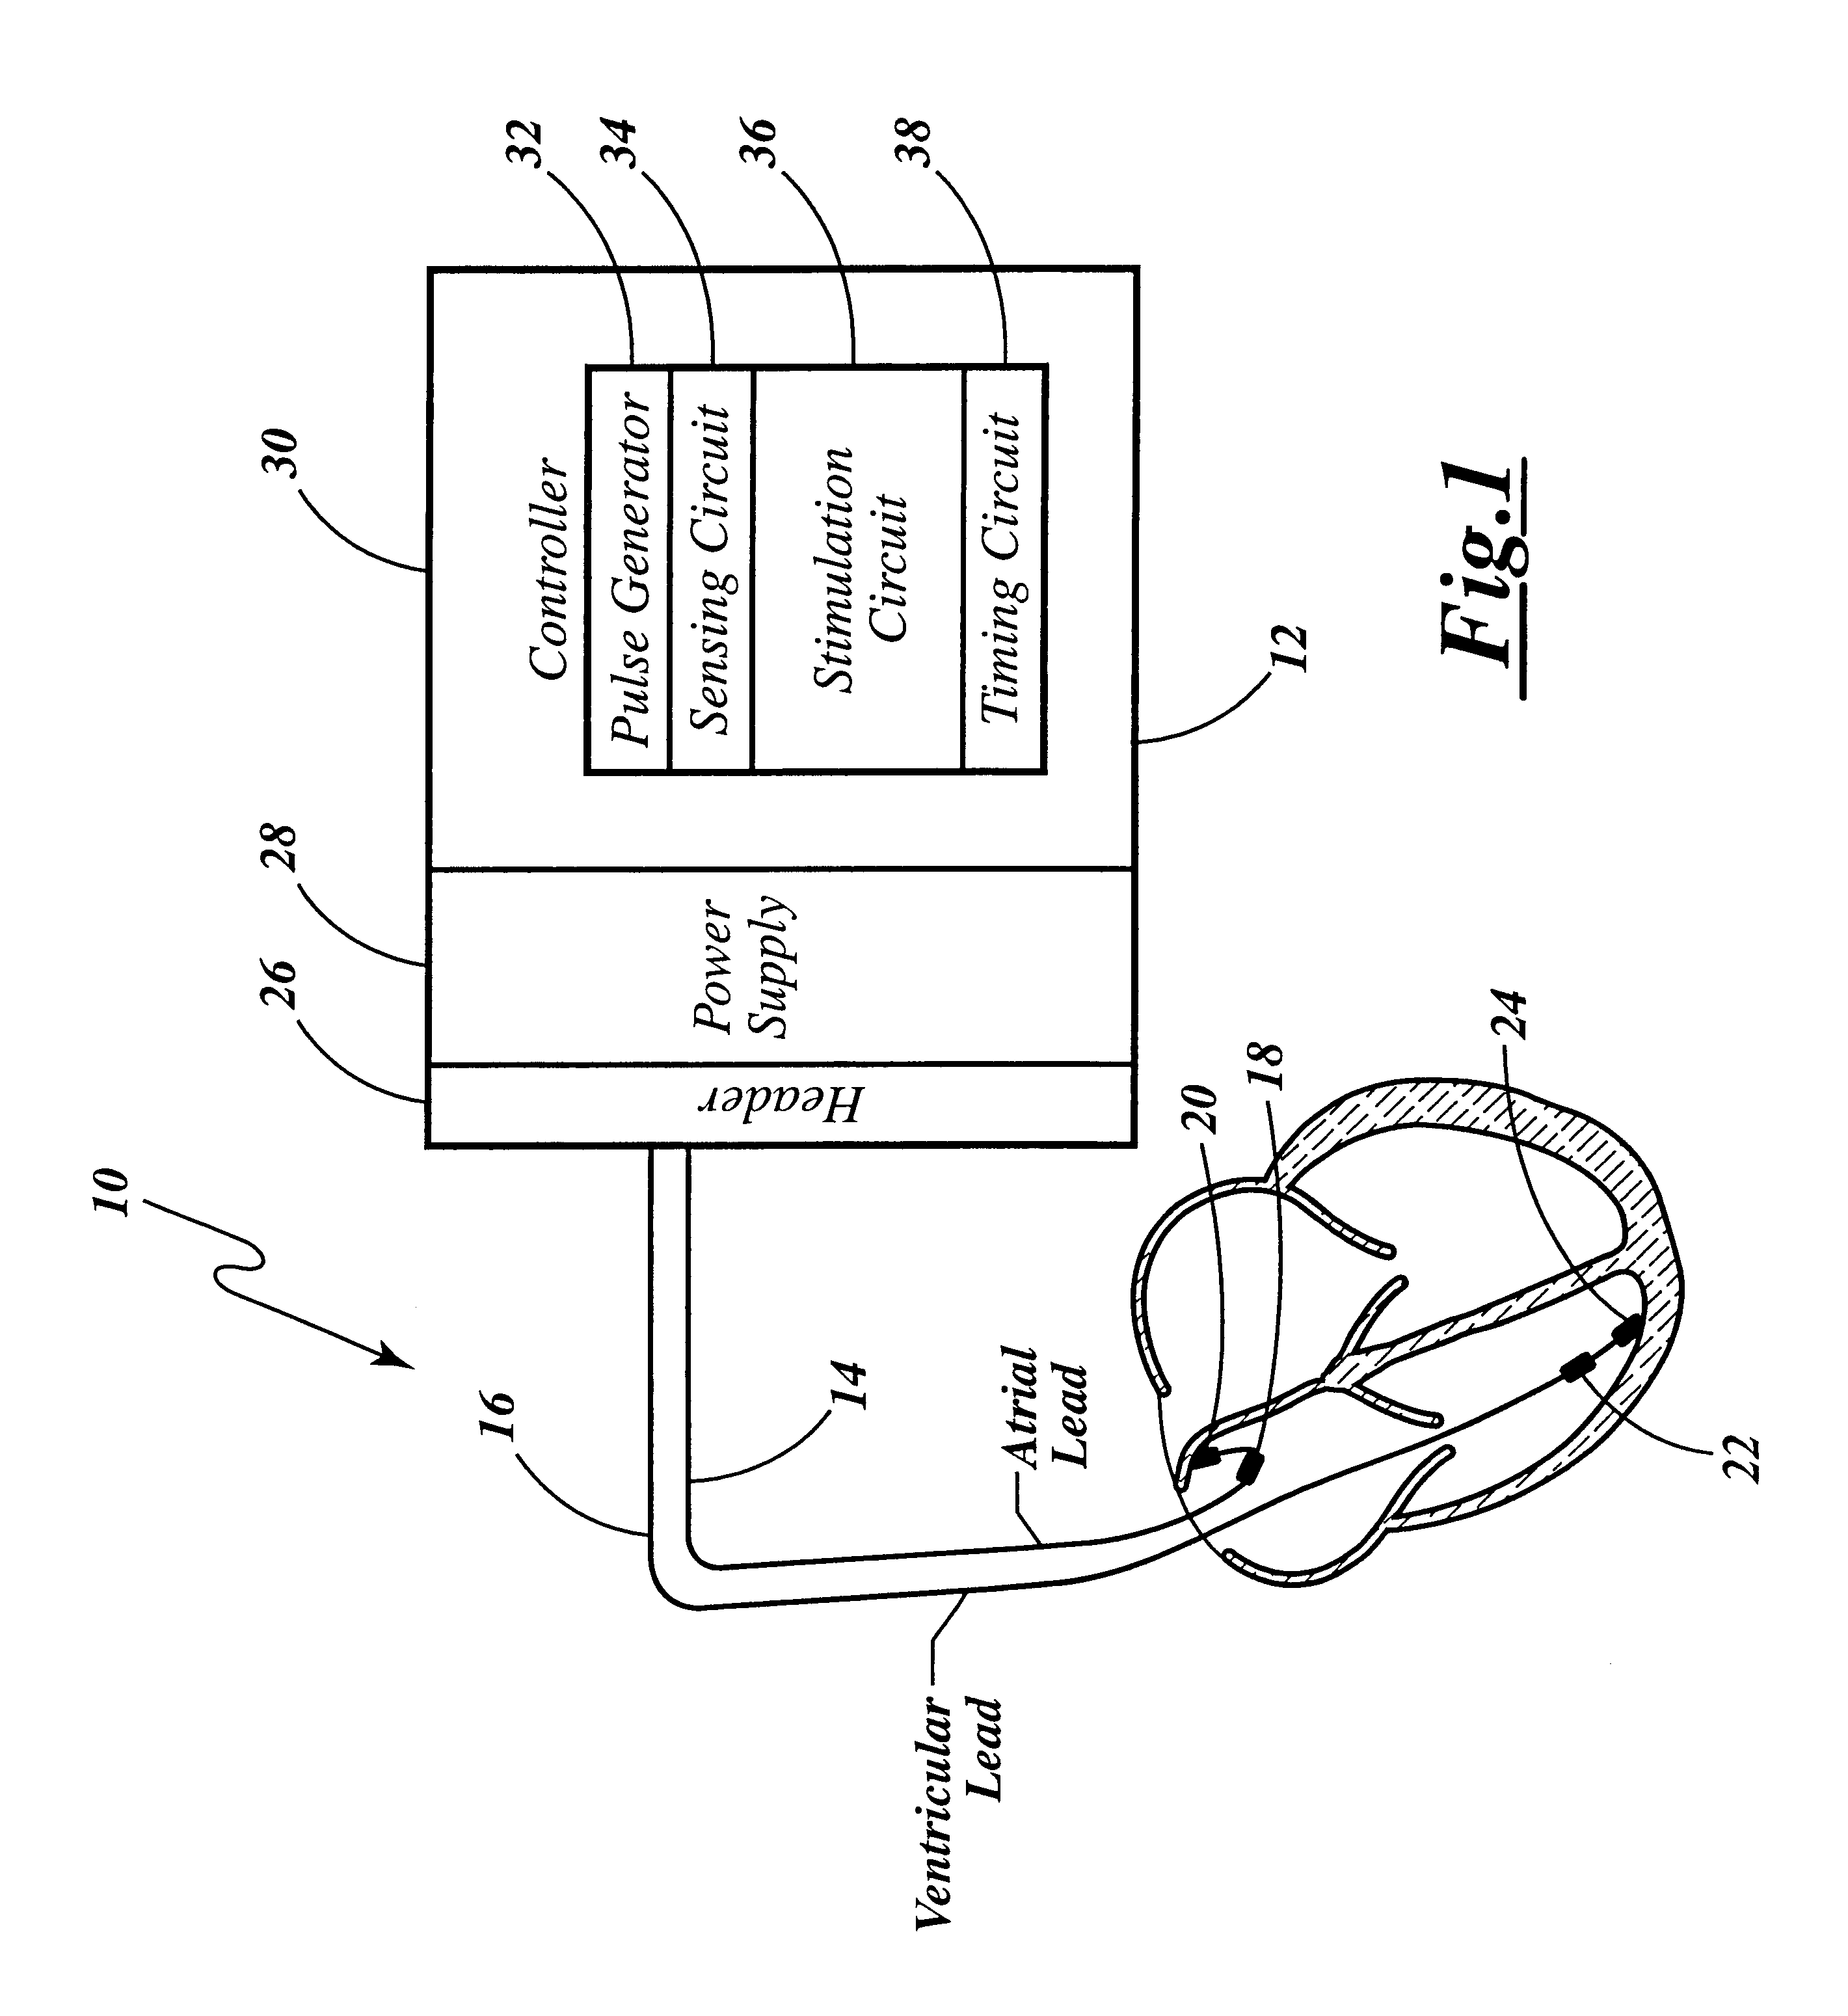 Cardiac management device with capability of noise detection in automatic capture verification